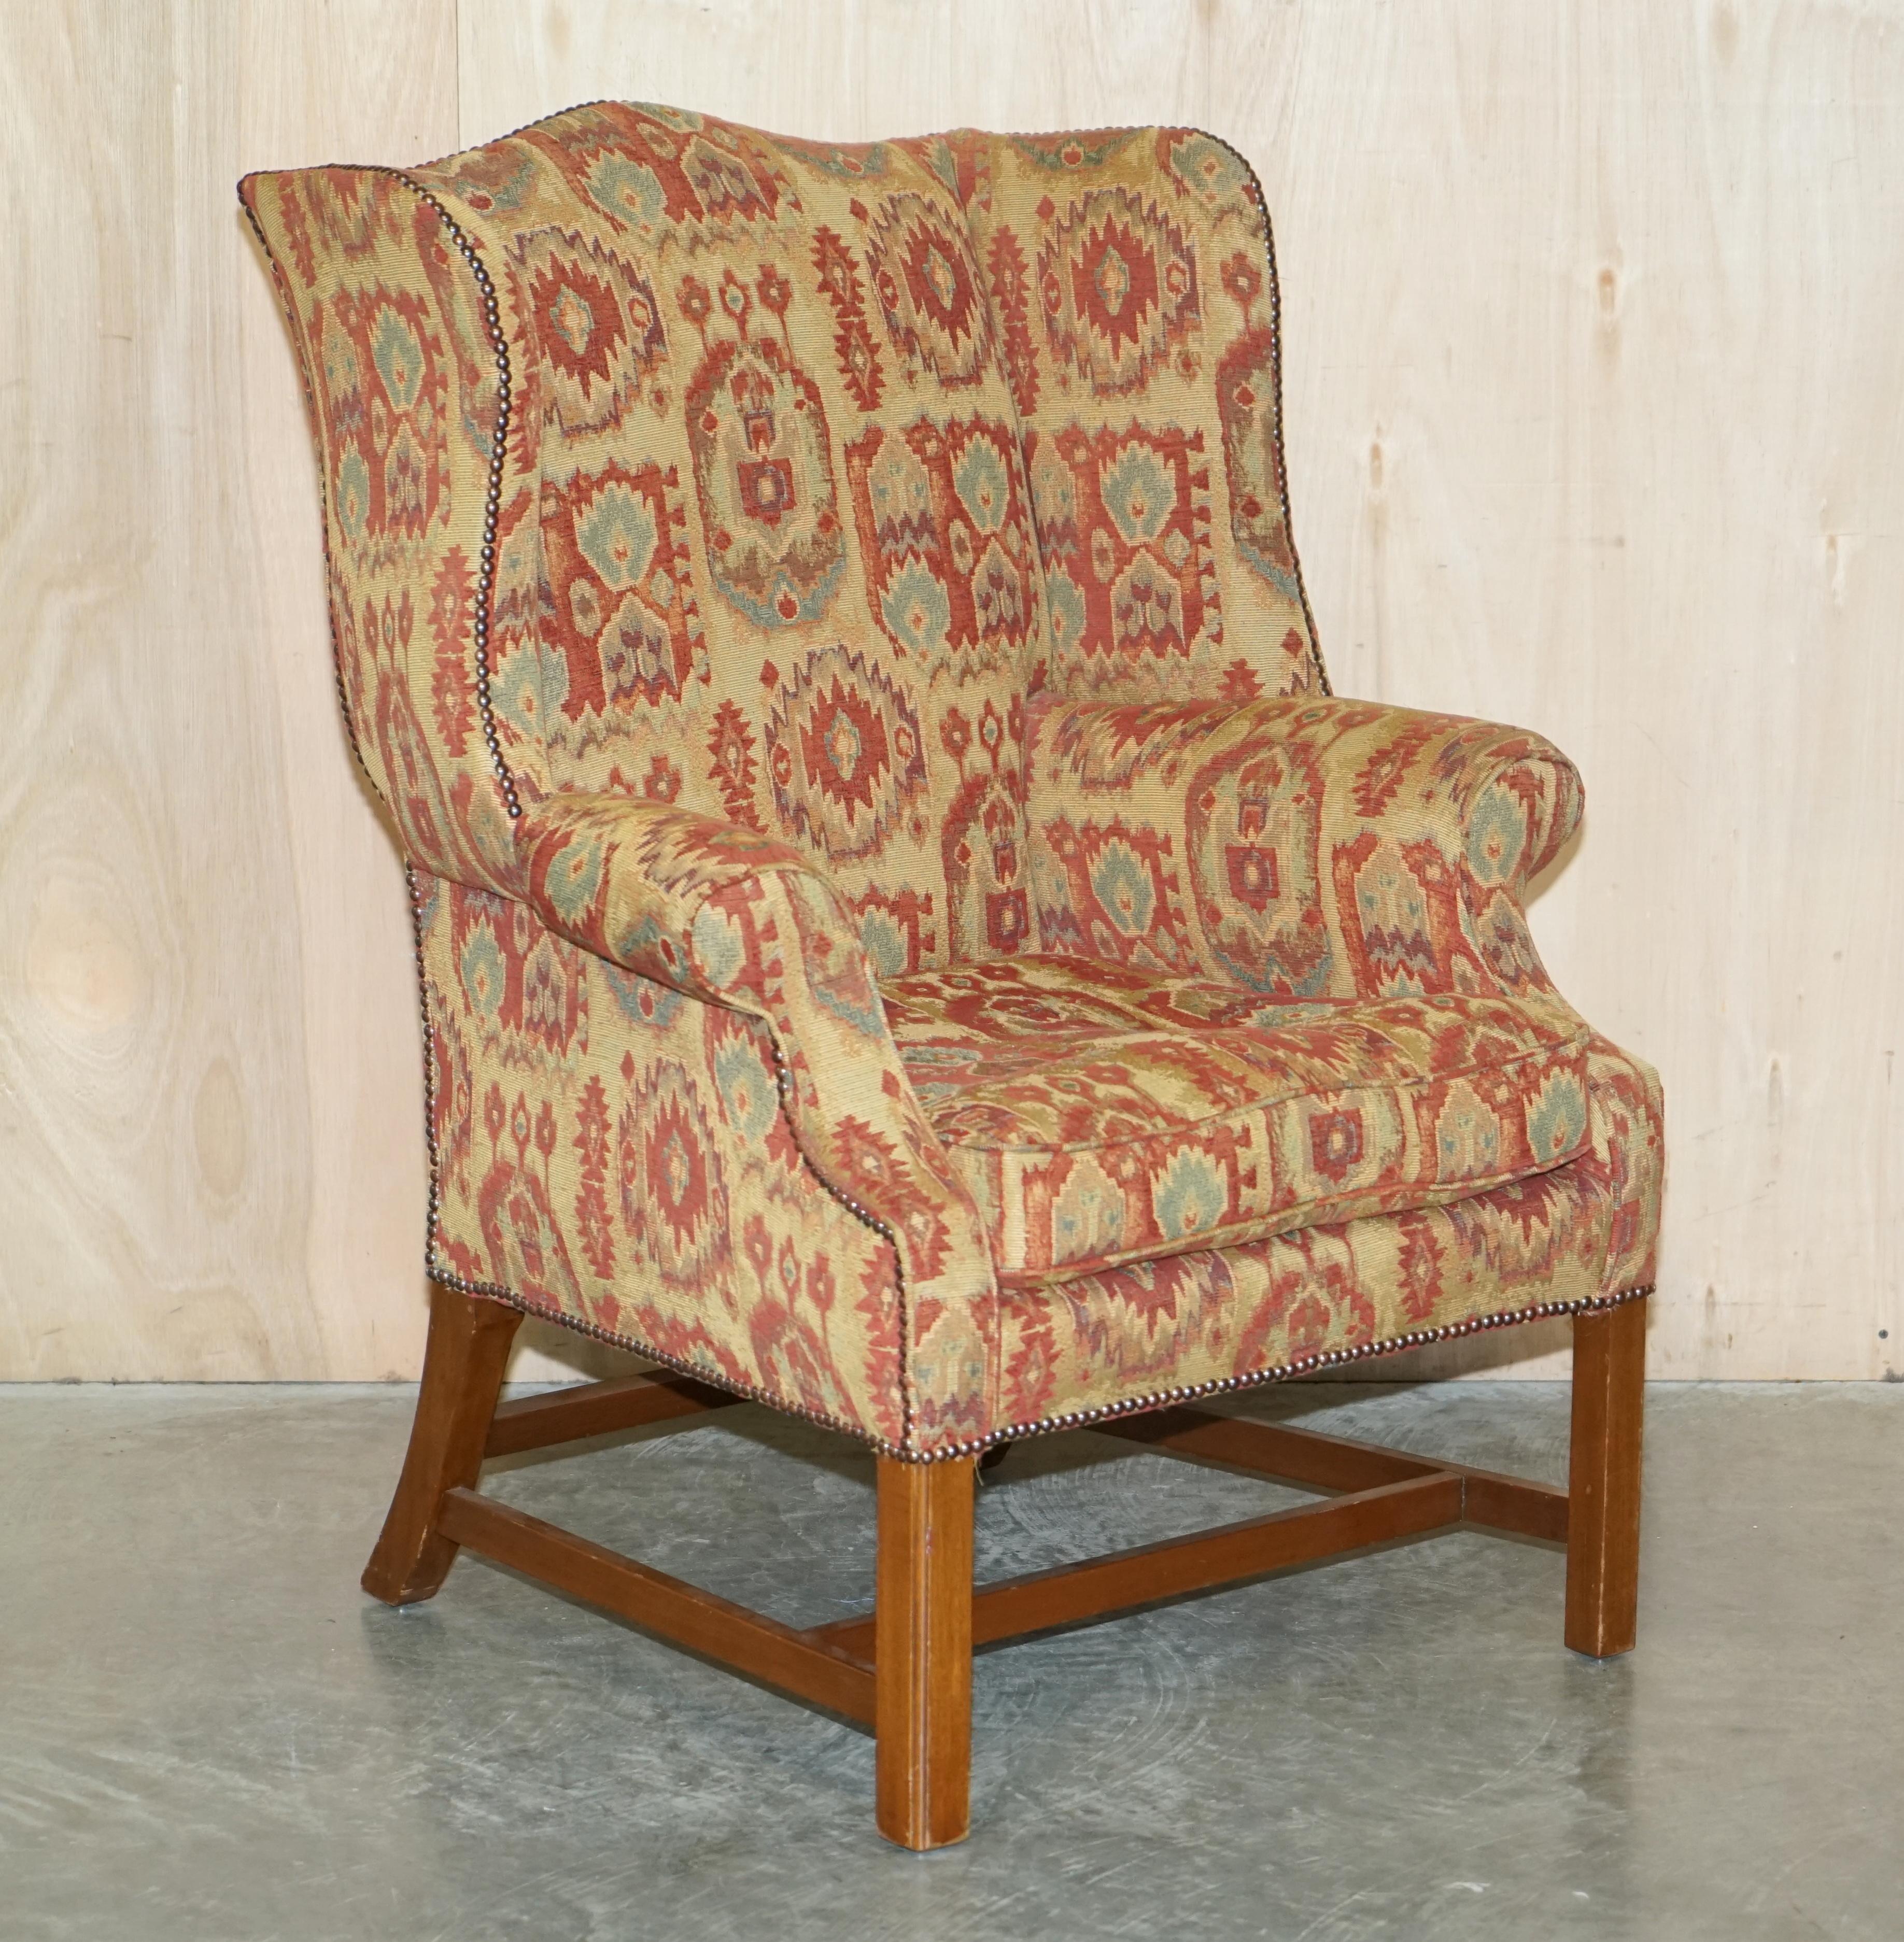 We are delighted to offer for sale this stunning pair of Kilim fabric upholstered wingback armchairs in lovely condition throughout.

A well-made and decorative pair of armchairs which are very comfortable, the upholstery is Kilim as mentioned